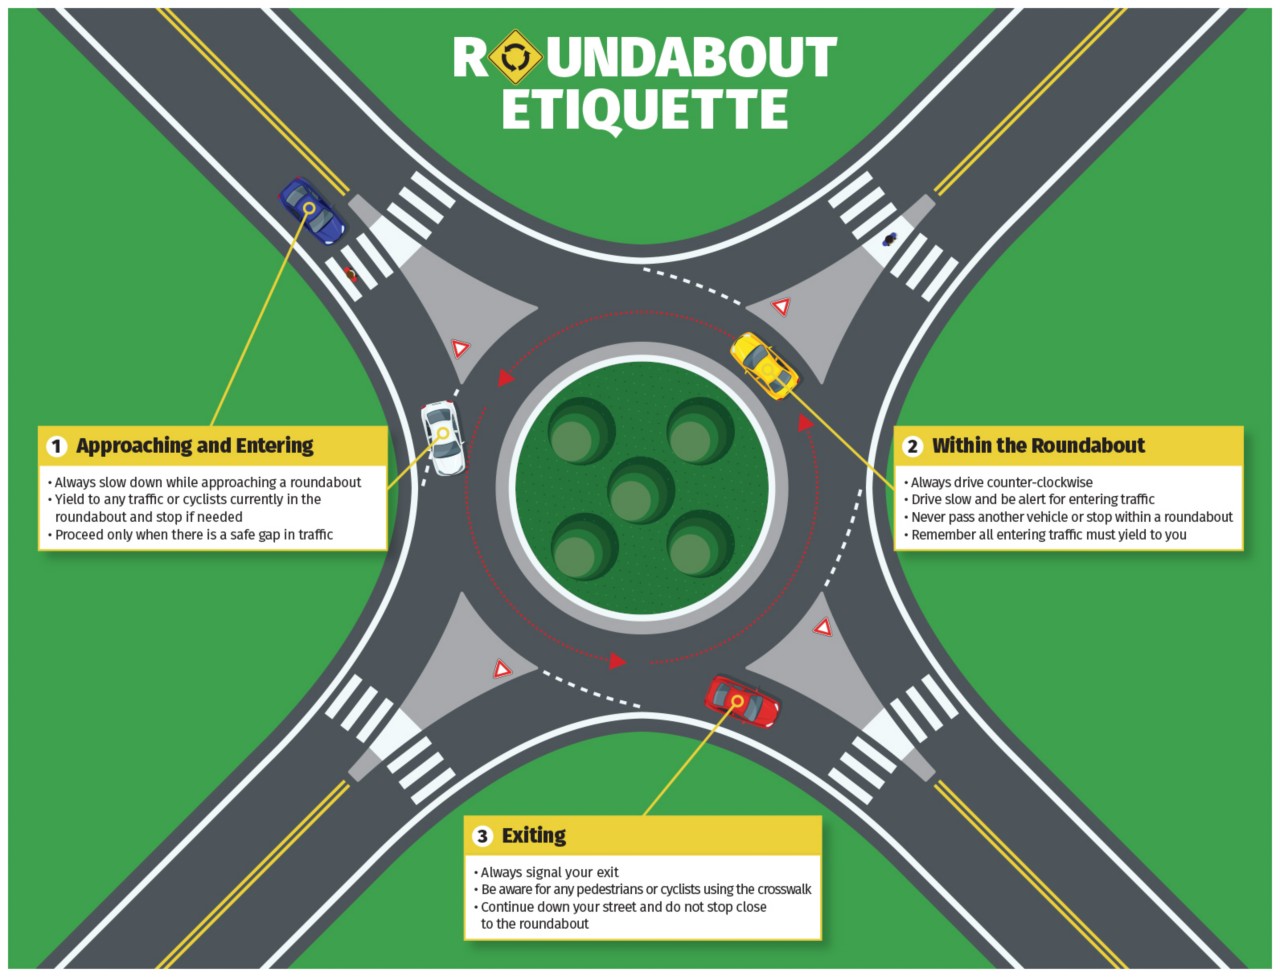 How to safely navigate a roundabout.